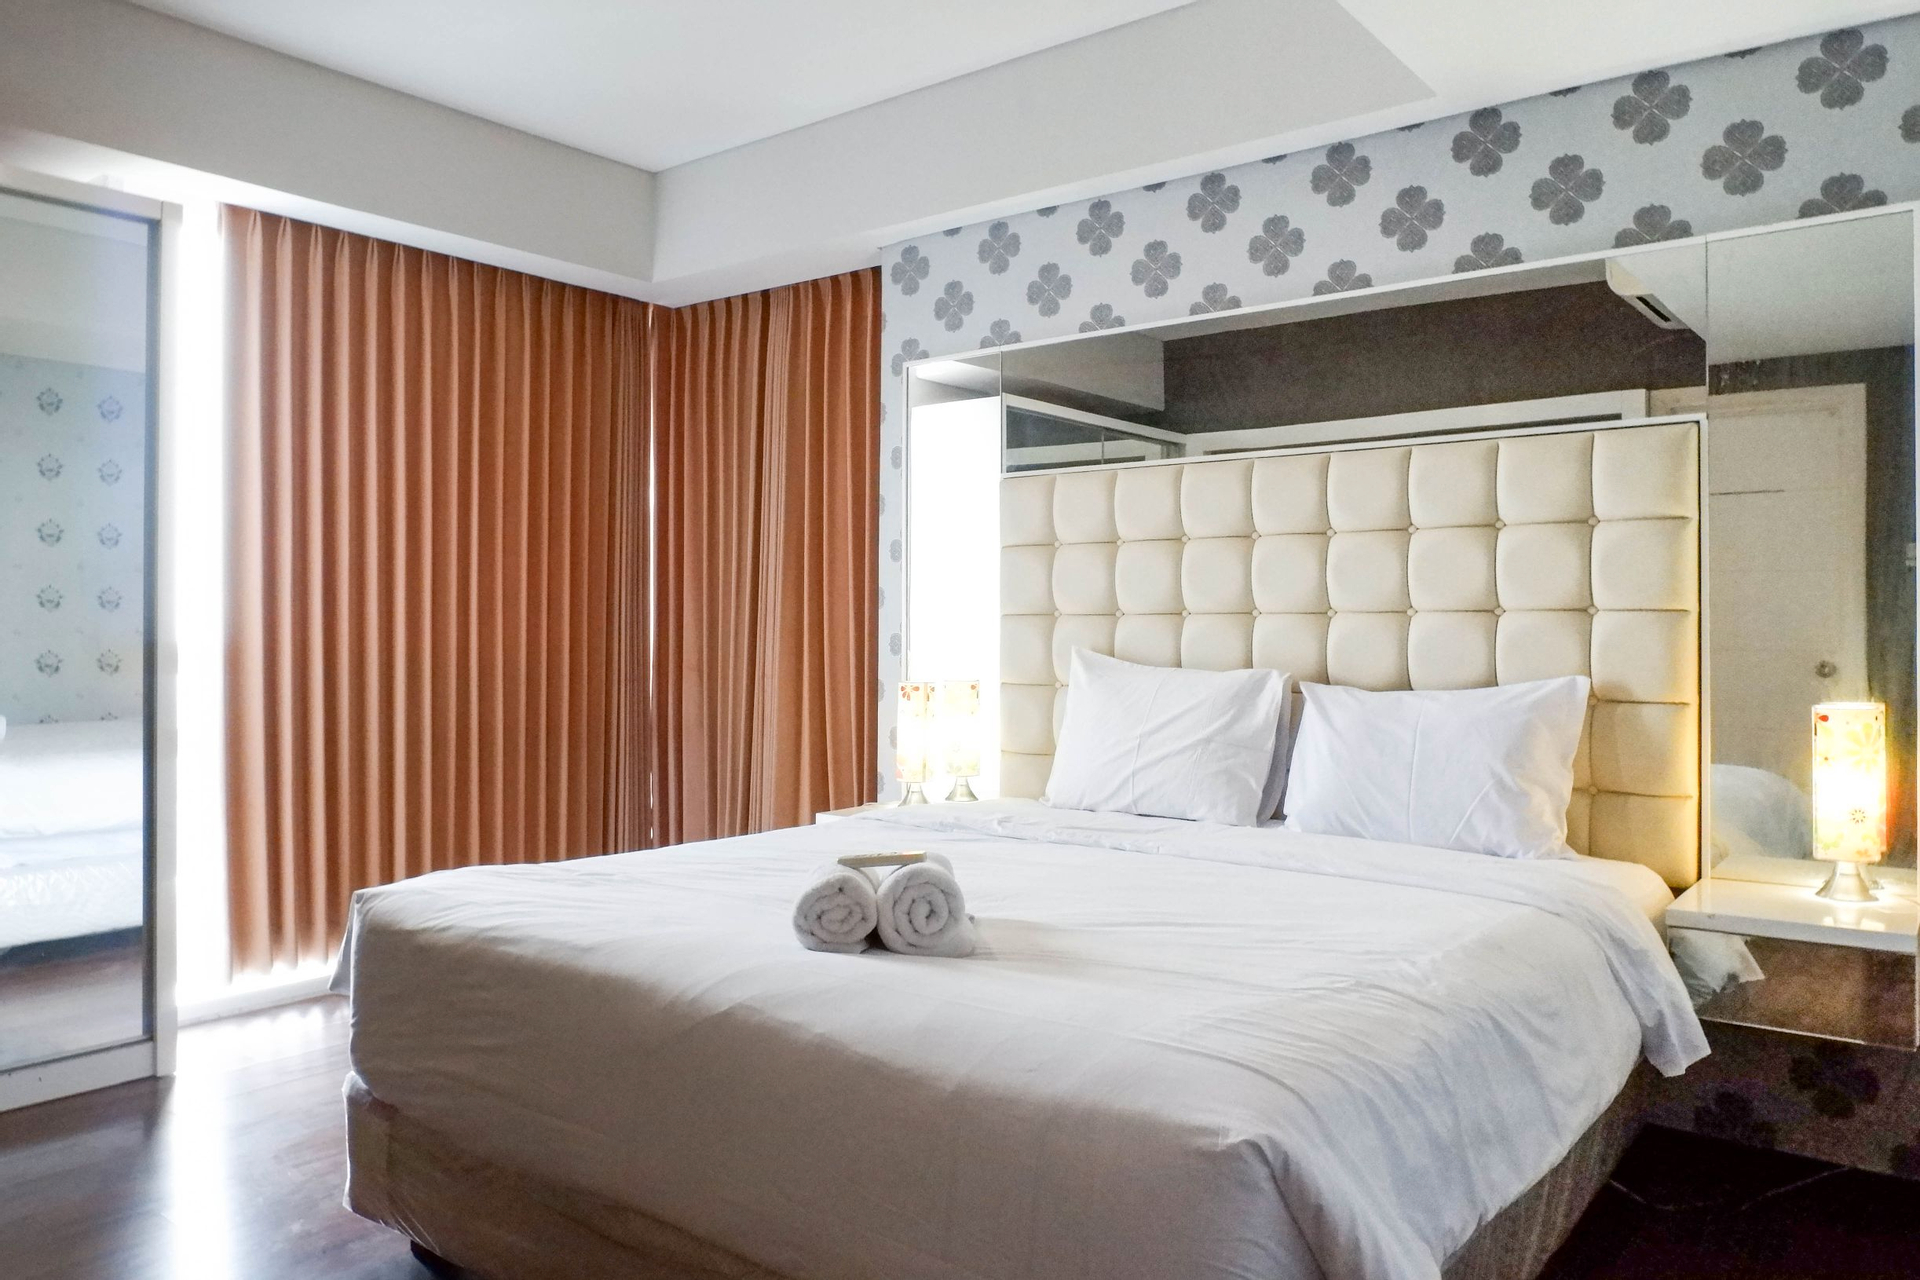 Bedroom 2, Luxurious and Exclusive 3BR Apartment at Trillium Residence By Travelio, Surabaya